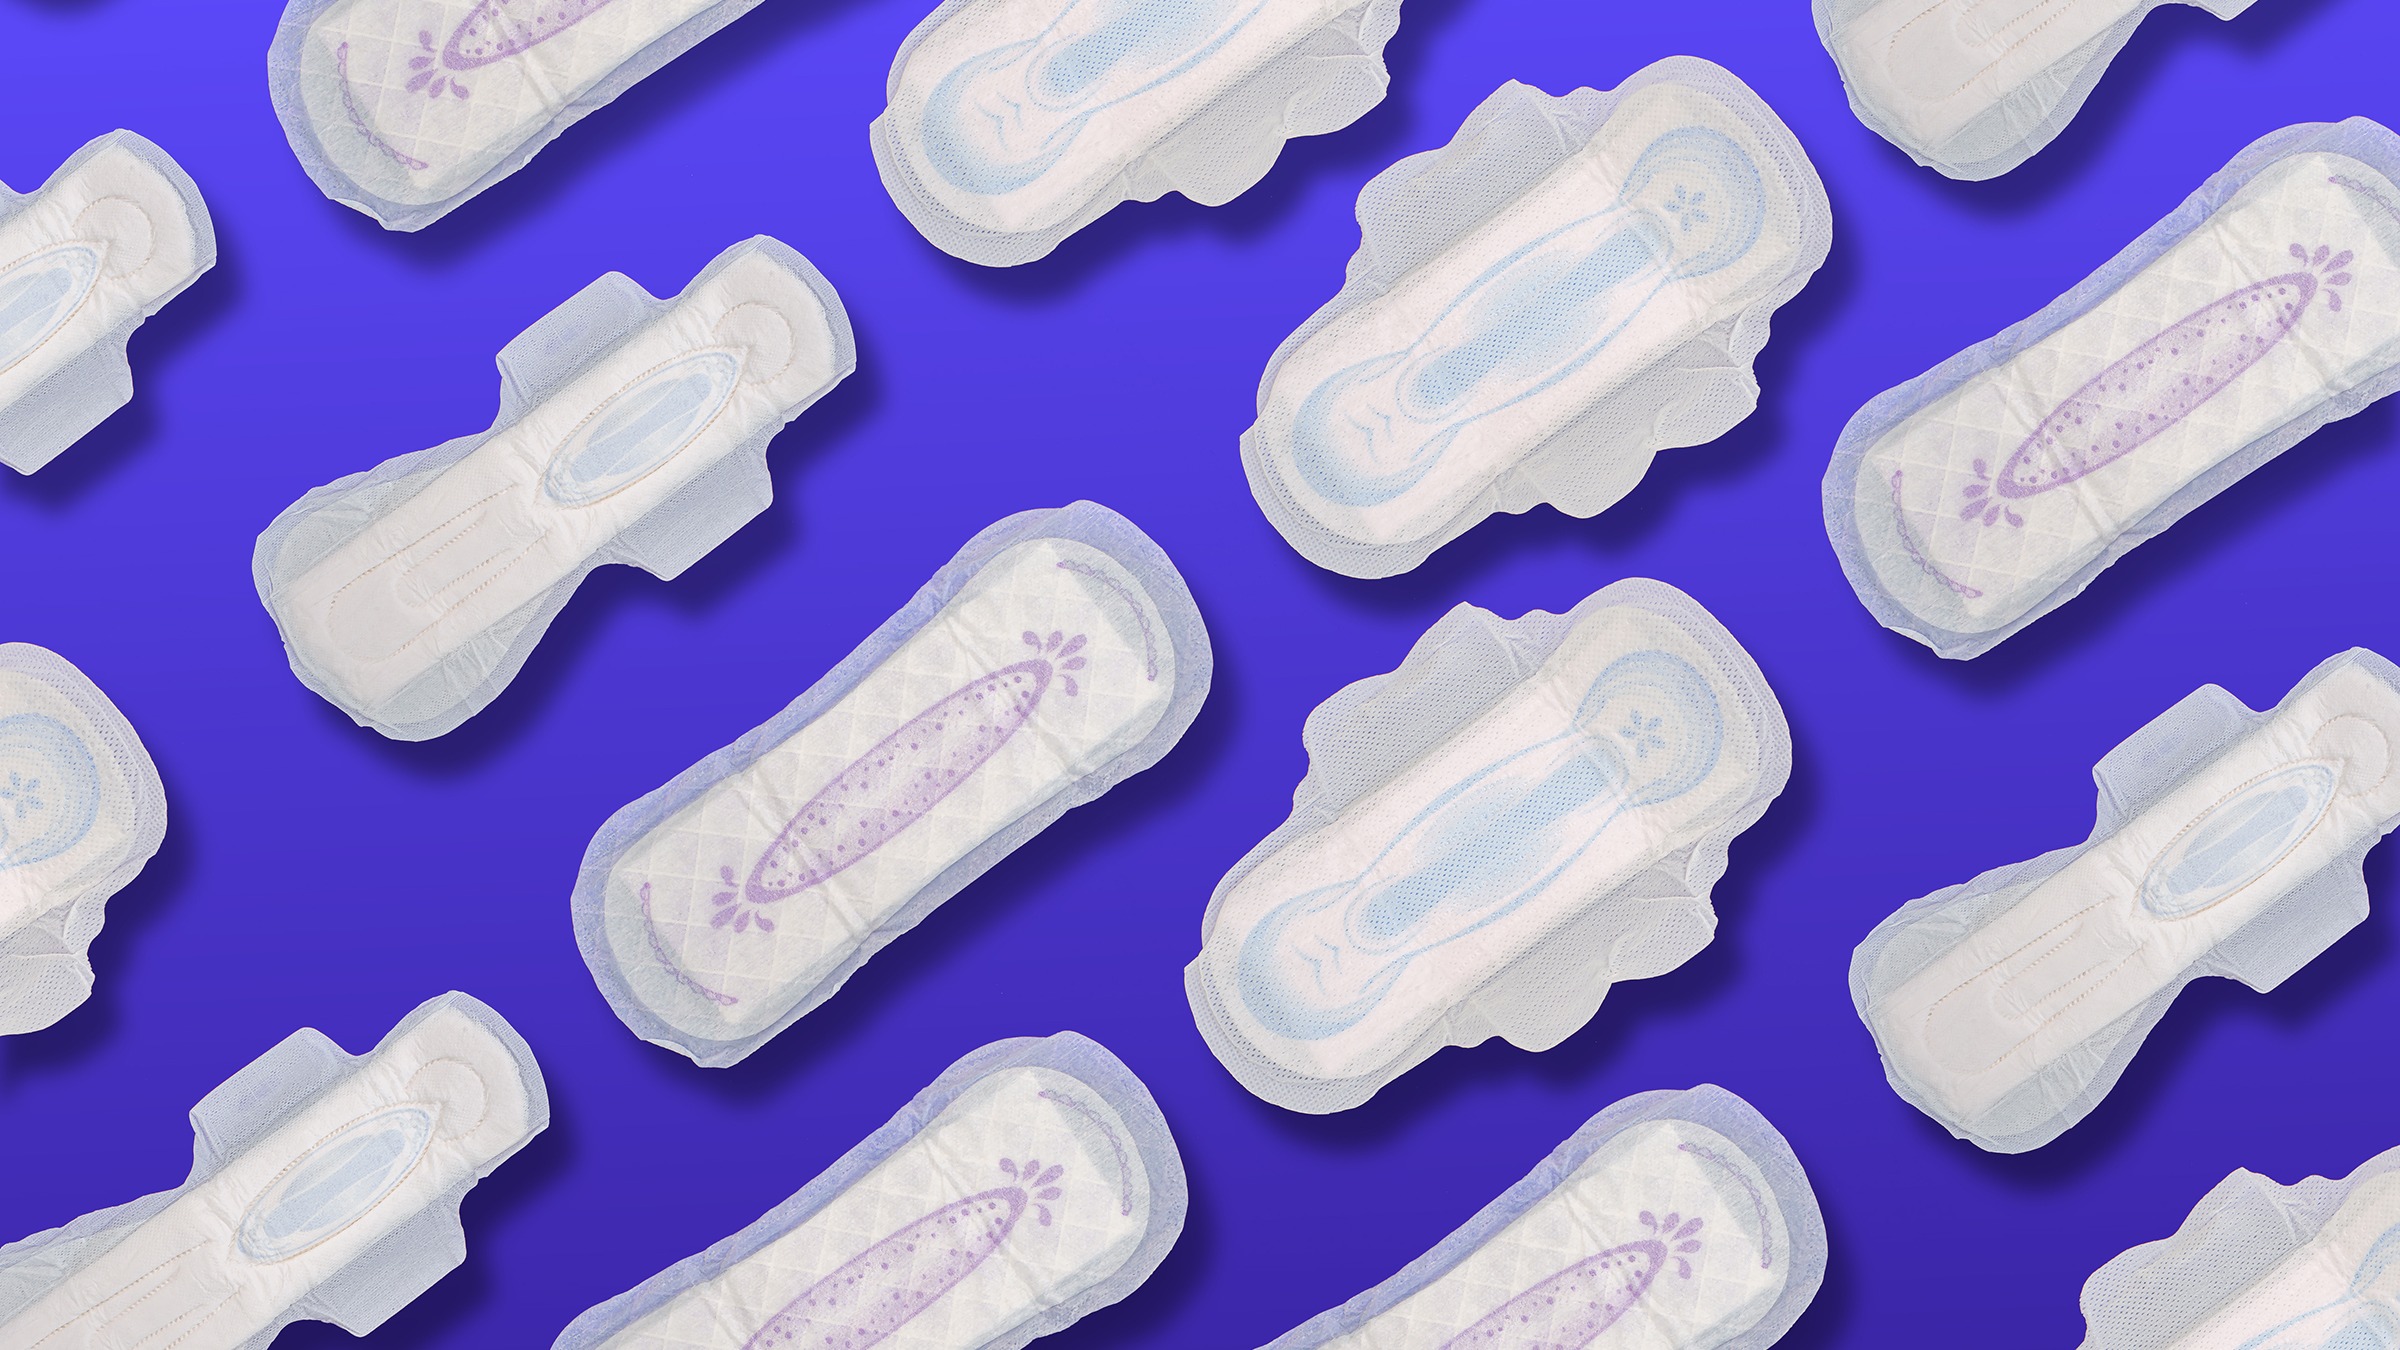 How to Make a Substitute Sanitary Pad: 7 Steps (with Pictures)